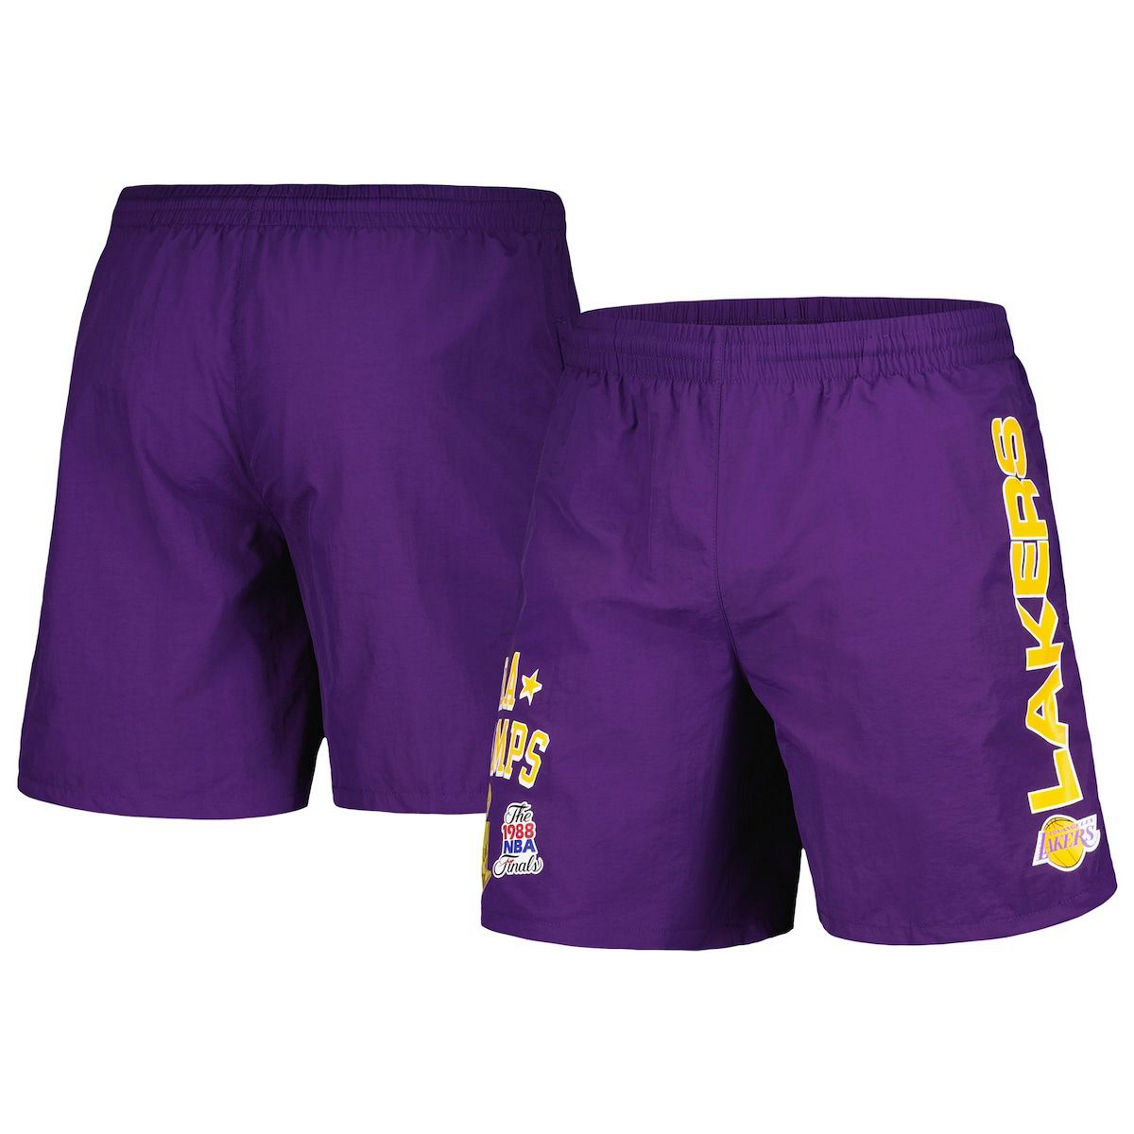 Mitchell & Ness Men's Purple Los Angeles Lakers 1988 Finals s Heritage Shorts - Image 2 of 4